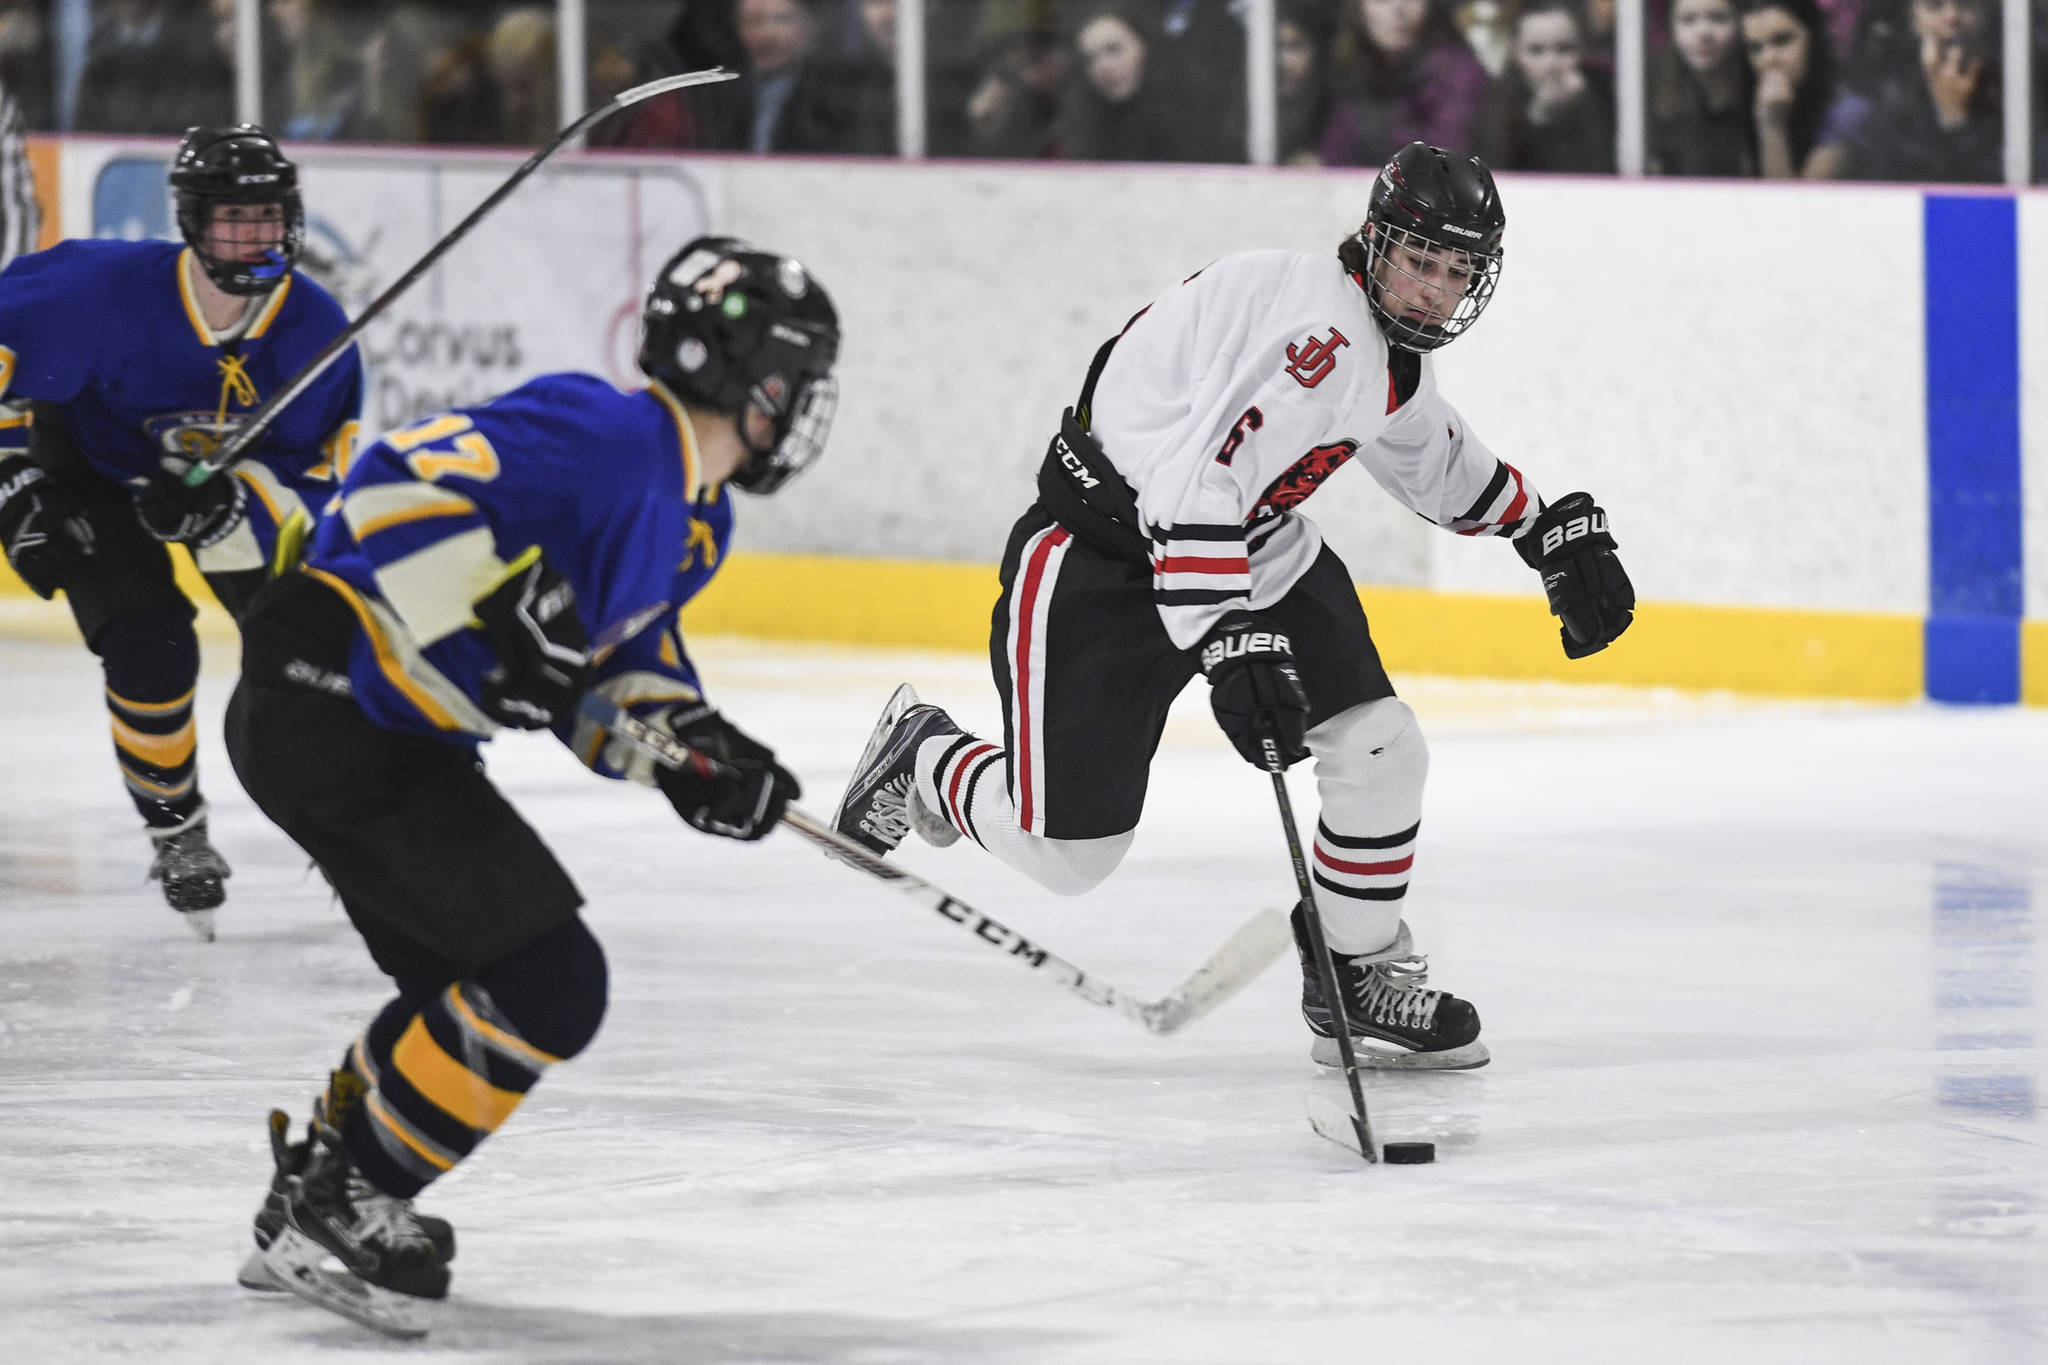 Juneau-Douglas’ Colter Polley moves the puck against Monroe Catholic’s Miles Fowler at the Treadwell Arena on Friday, Nov. 15, 2019. JDHS won 13-0. (Michael Penn | Juneau Empire)